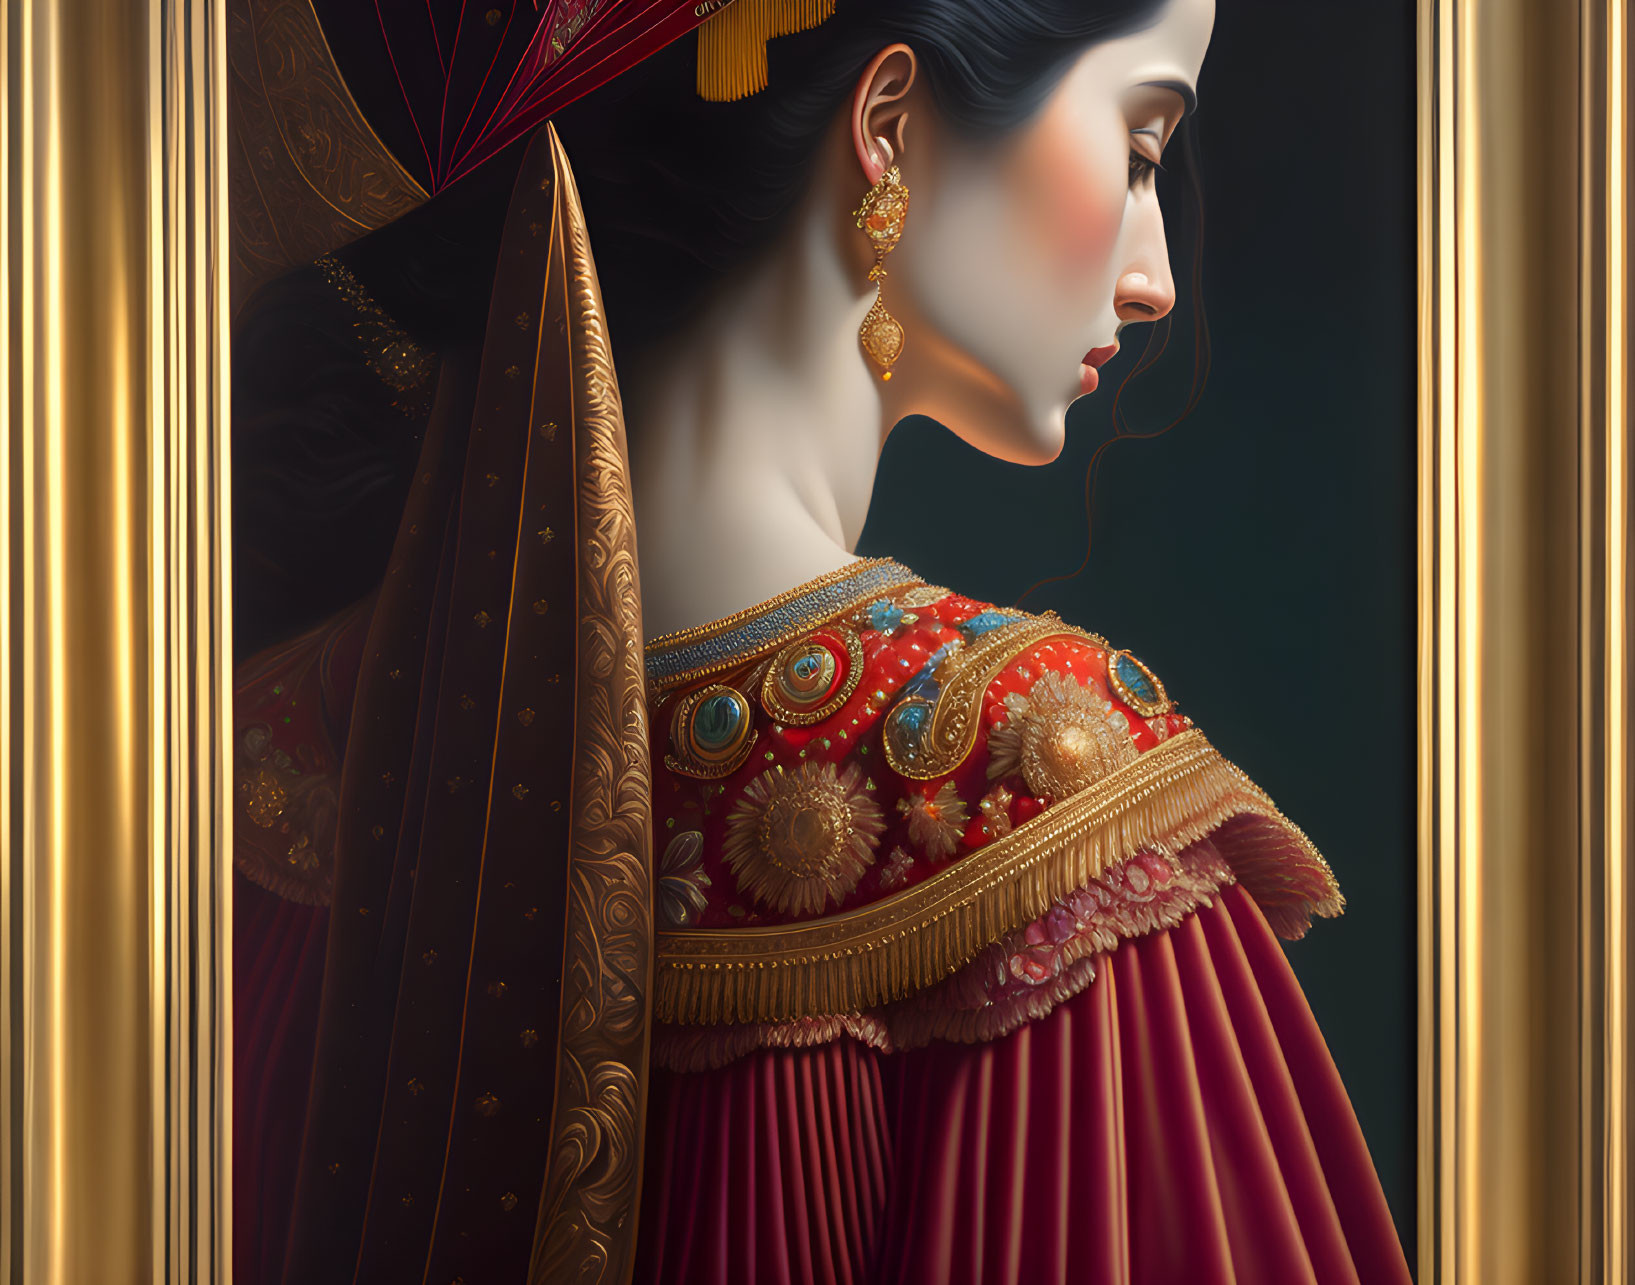 Digital portrait of a woman in South Asian attire with intricate details.